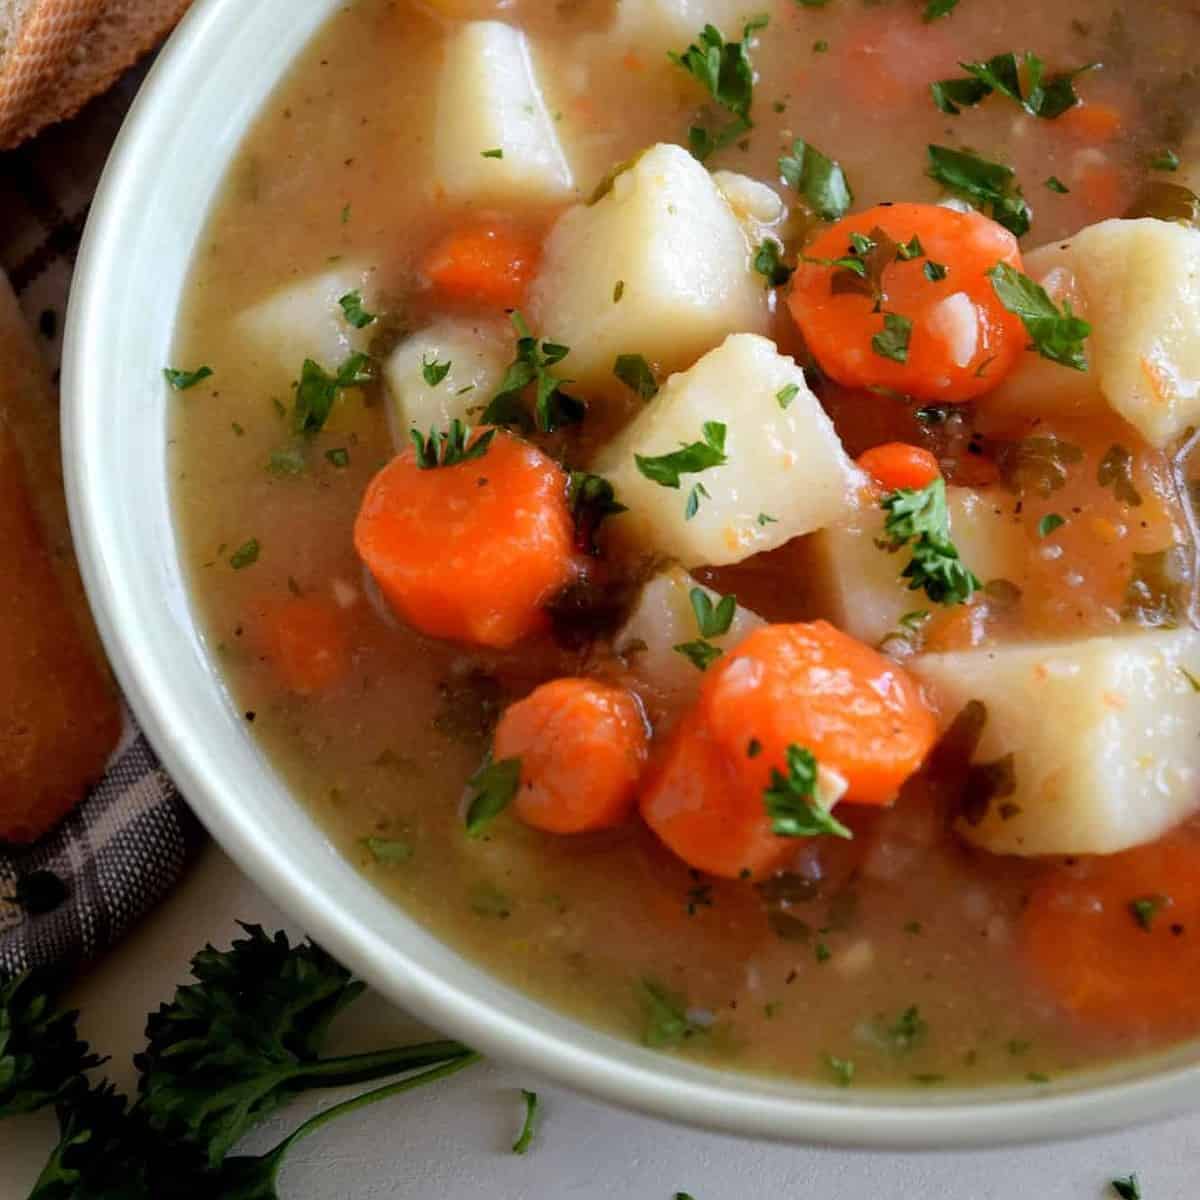  Don't let the name fool you – this soup is anything but poor in taste!